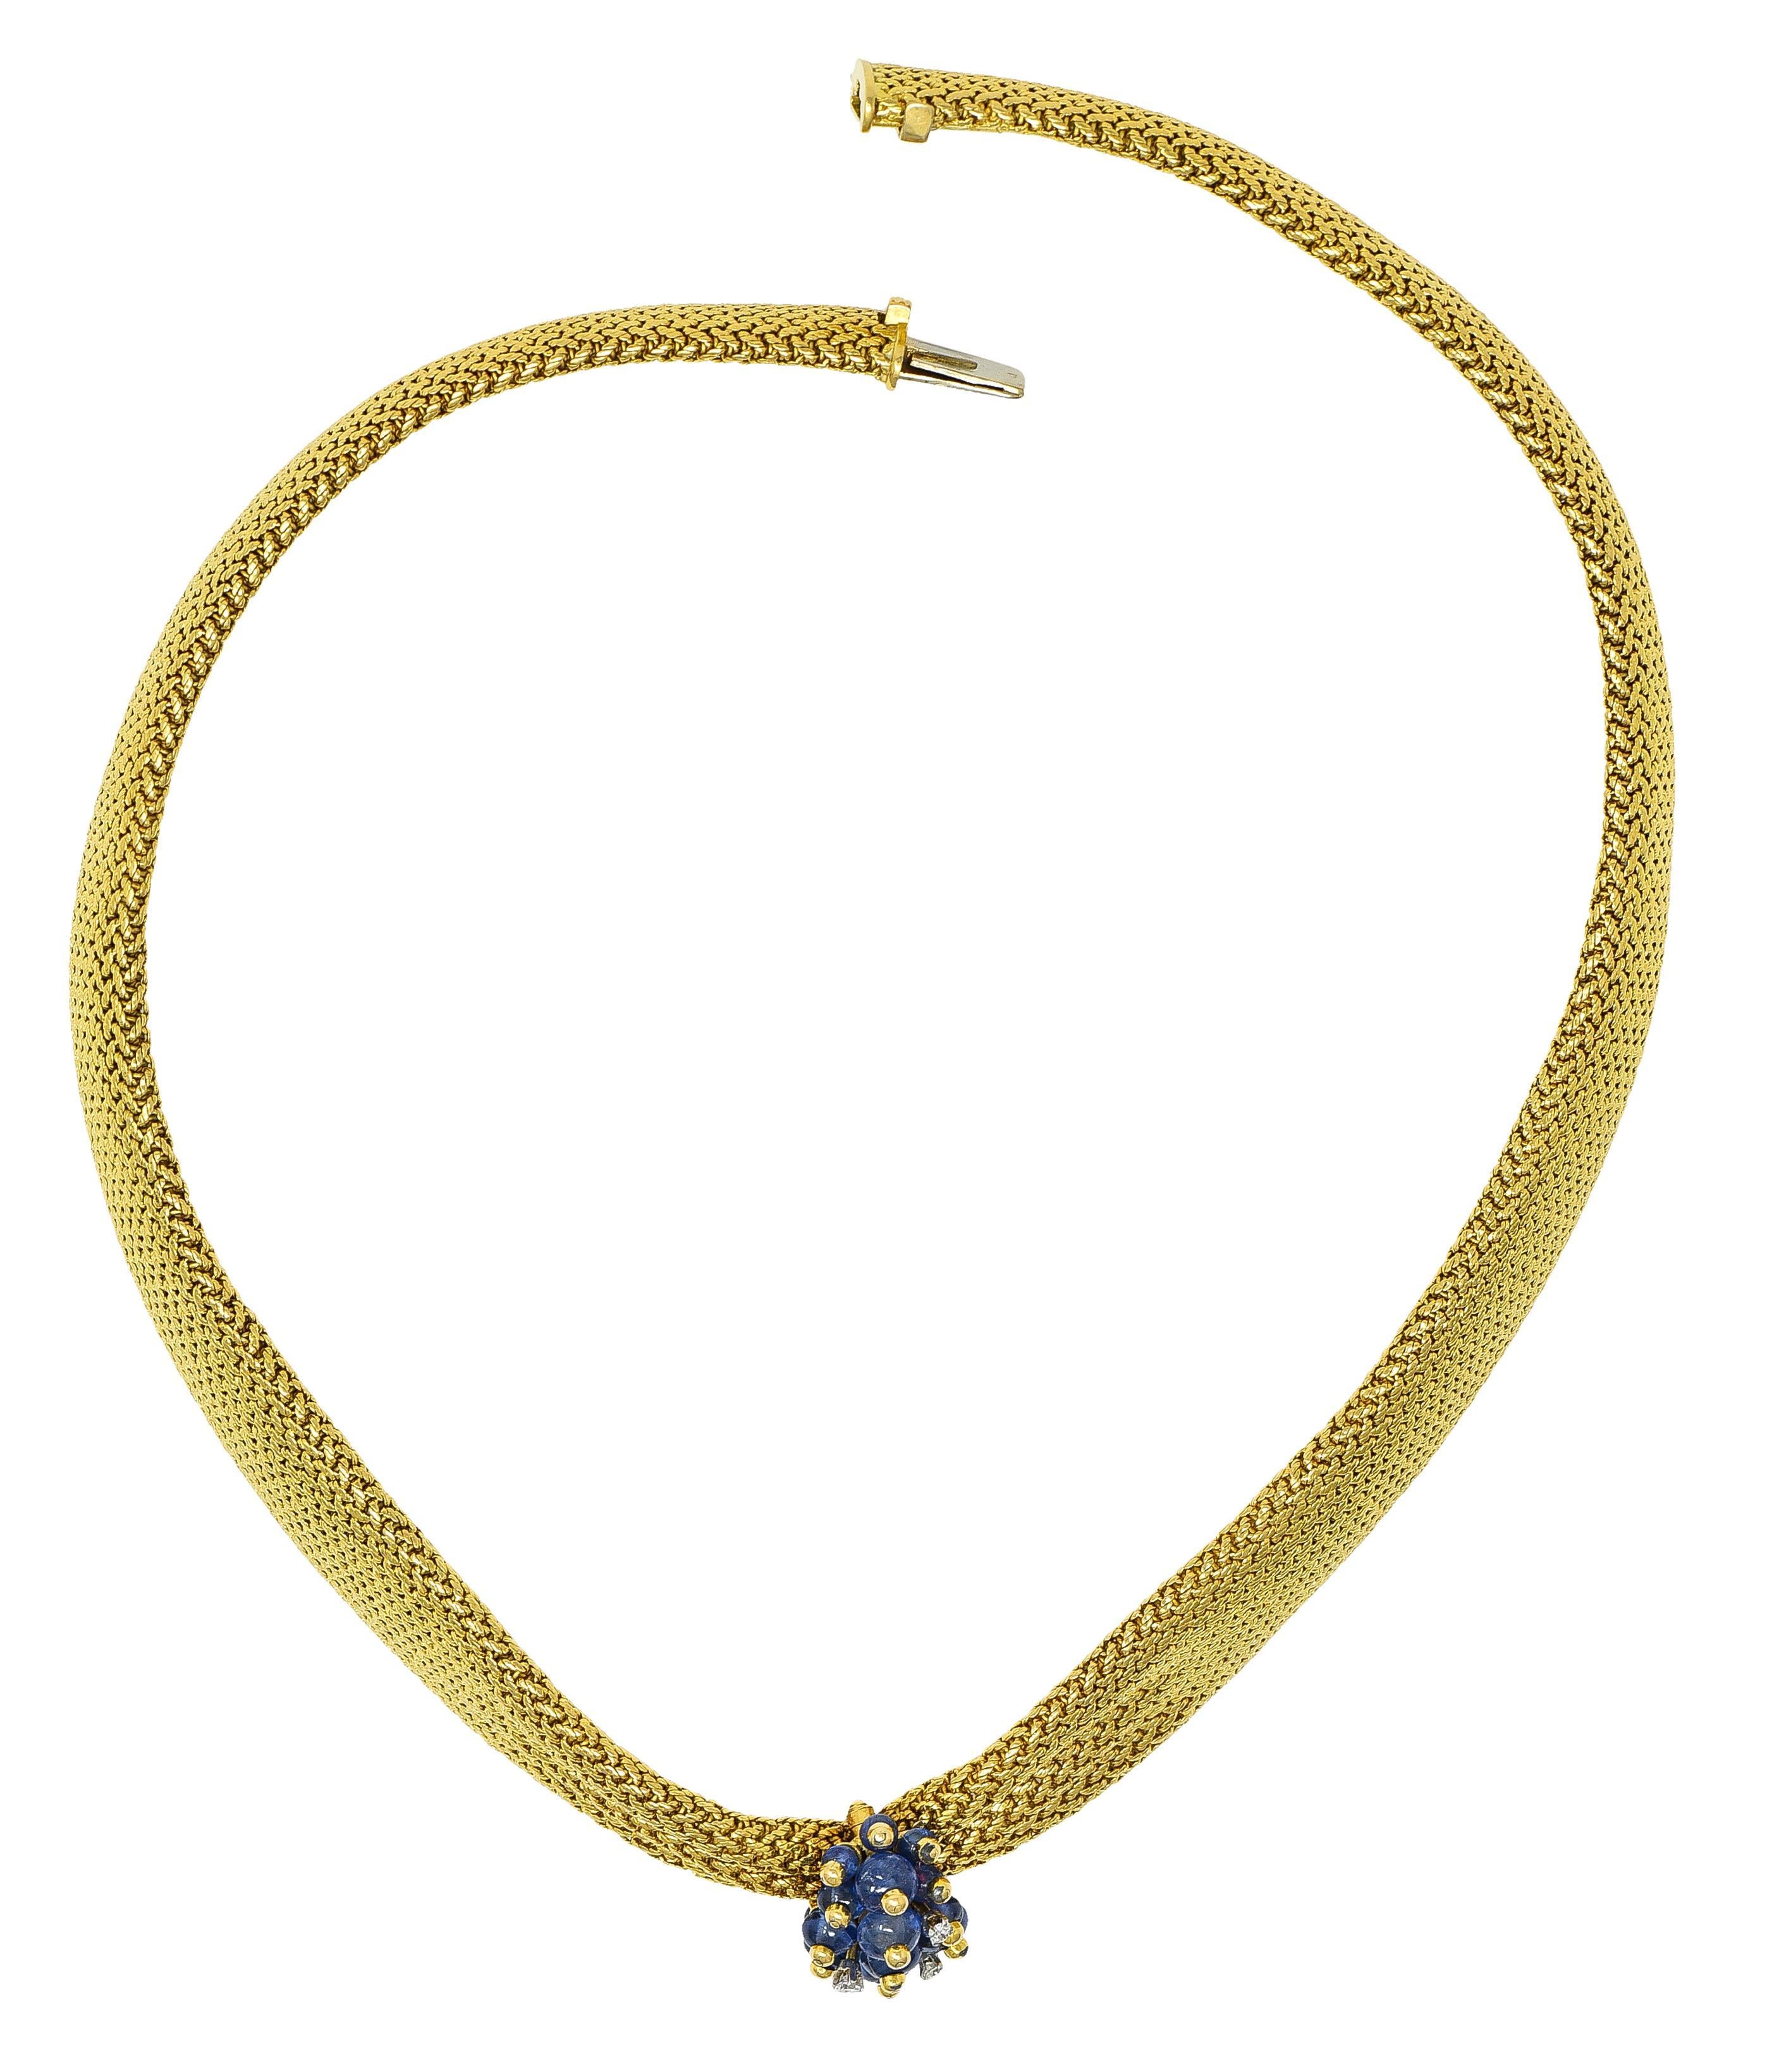 Designed as a graduated collar comprised of finely woven gold mesh
Fabric-like and cinched with a clustered sapphire bead station
Featuring round sapphire beads measuring 3.0 to 5.0 mm round 
Transparent light to medium blue in color - each topped